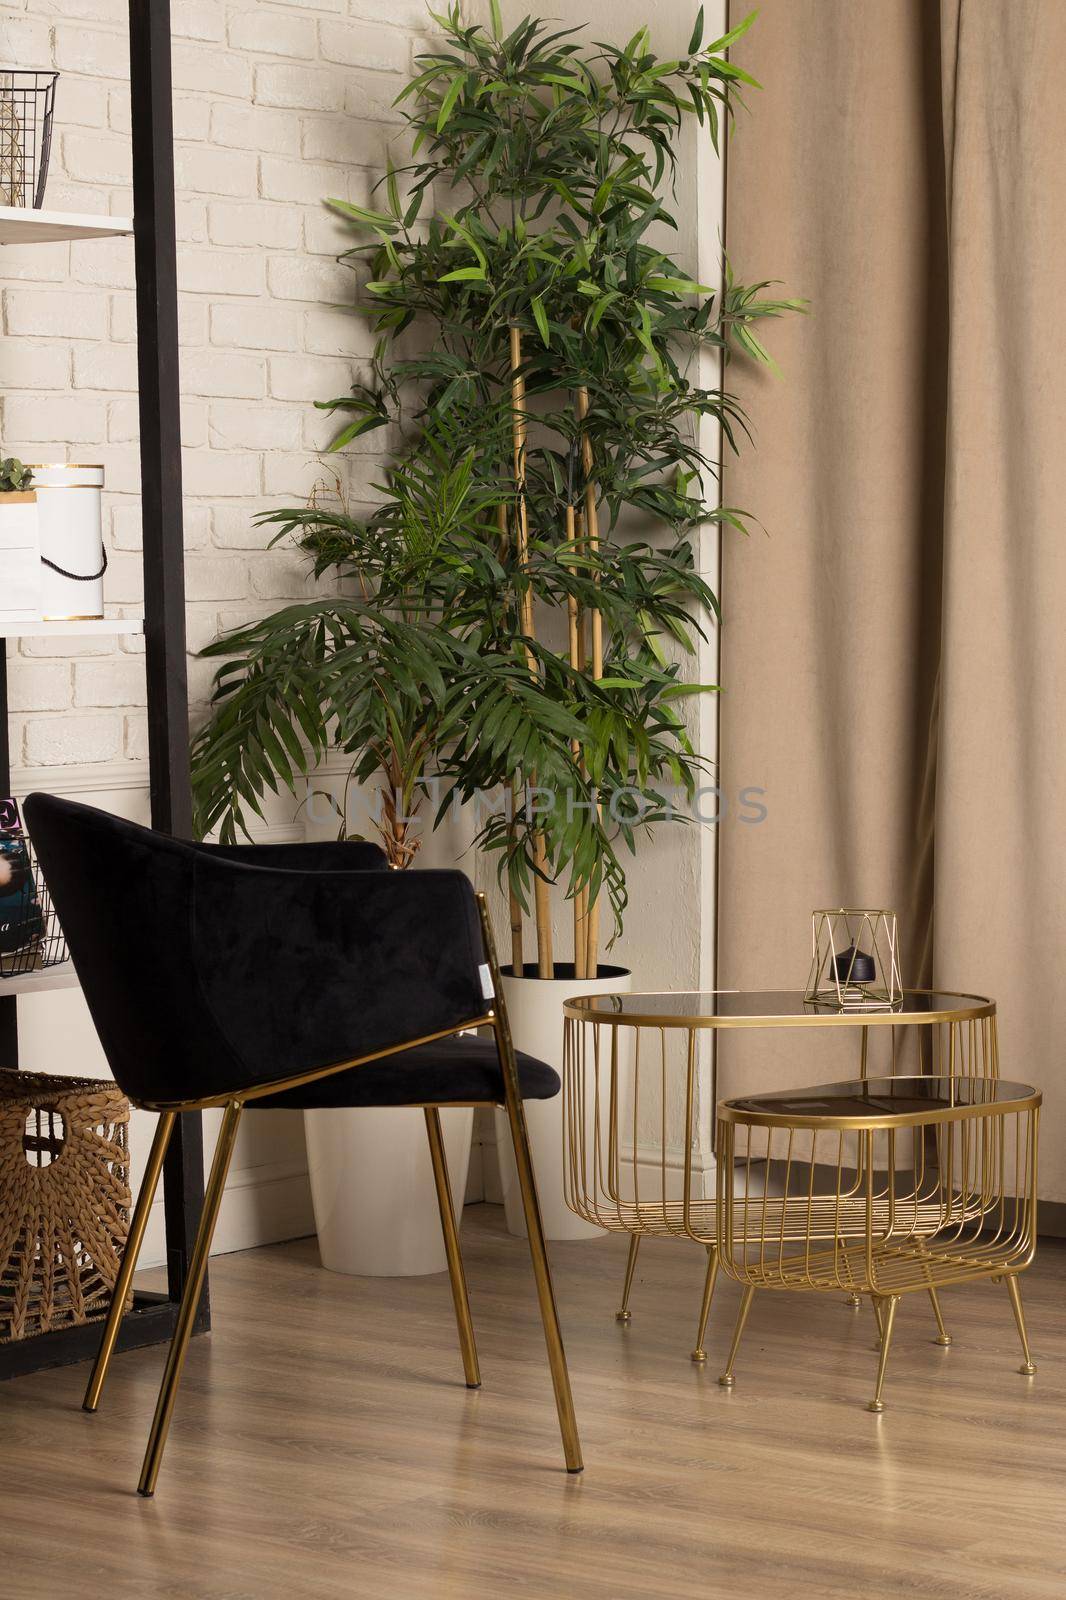 Interior with designer black armchair, plant, table, wall and shelf with accessories in modern home decor.